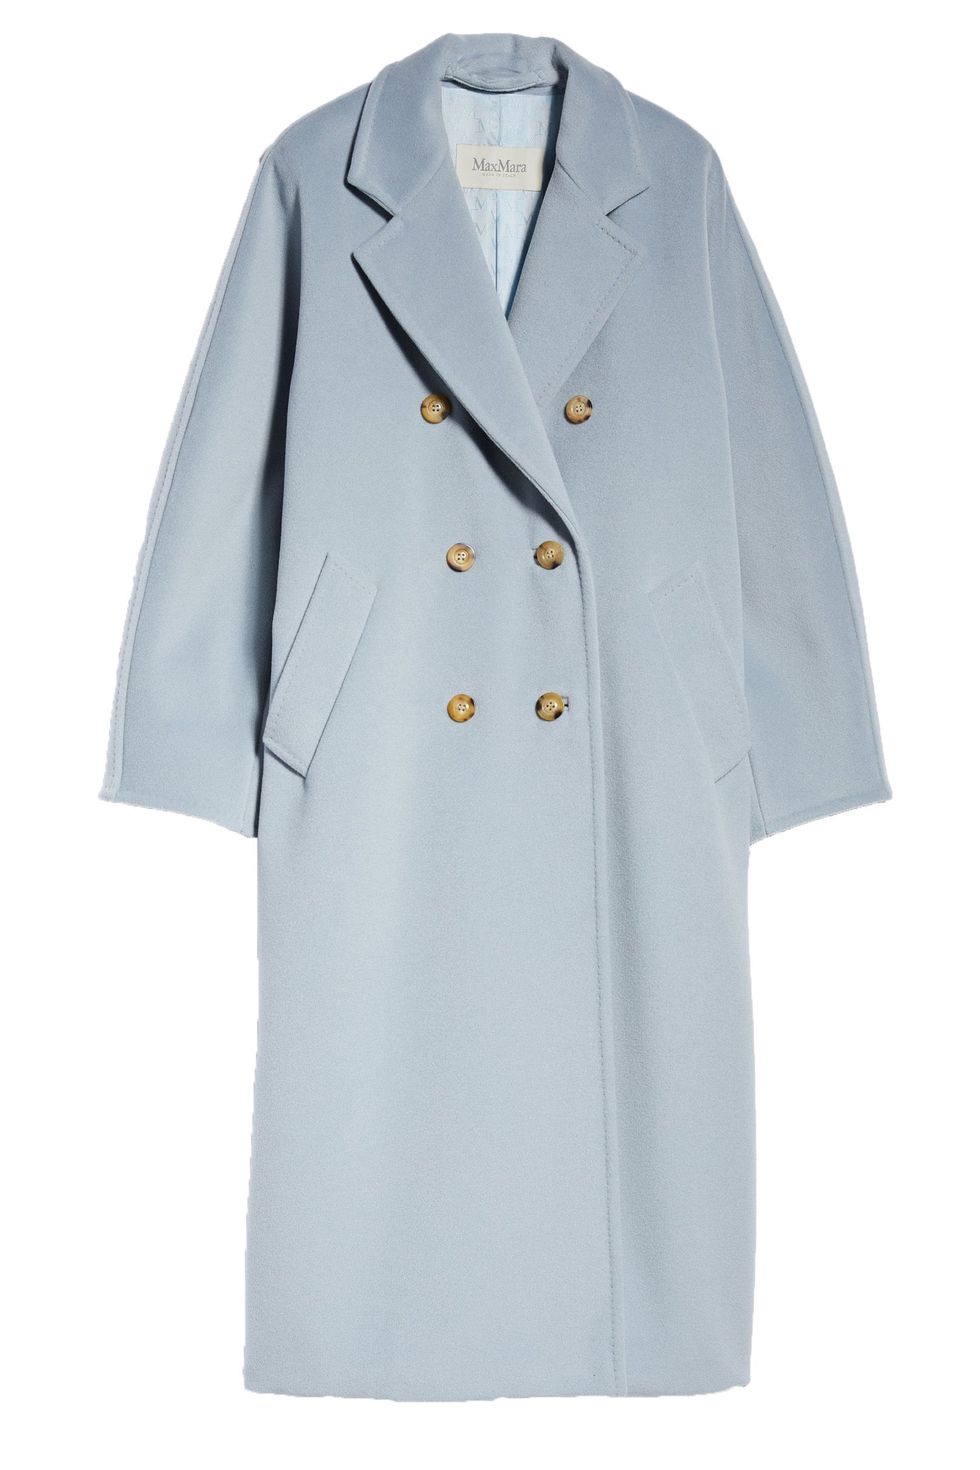 The cosiest cashmere coats to shop now and love forever